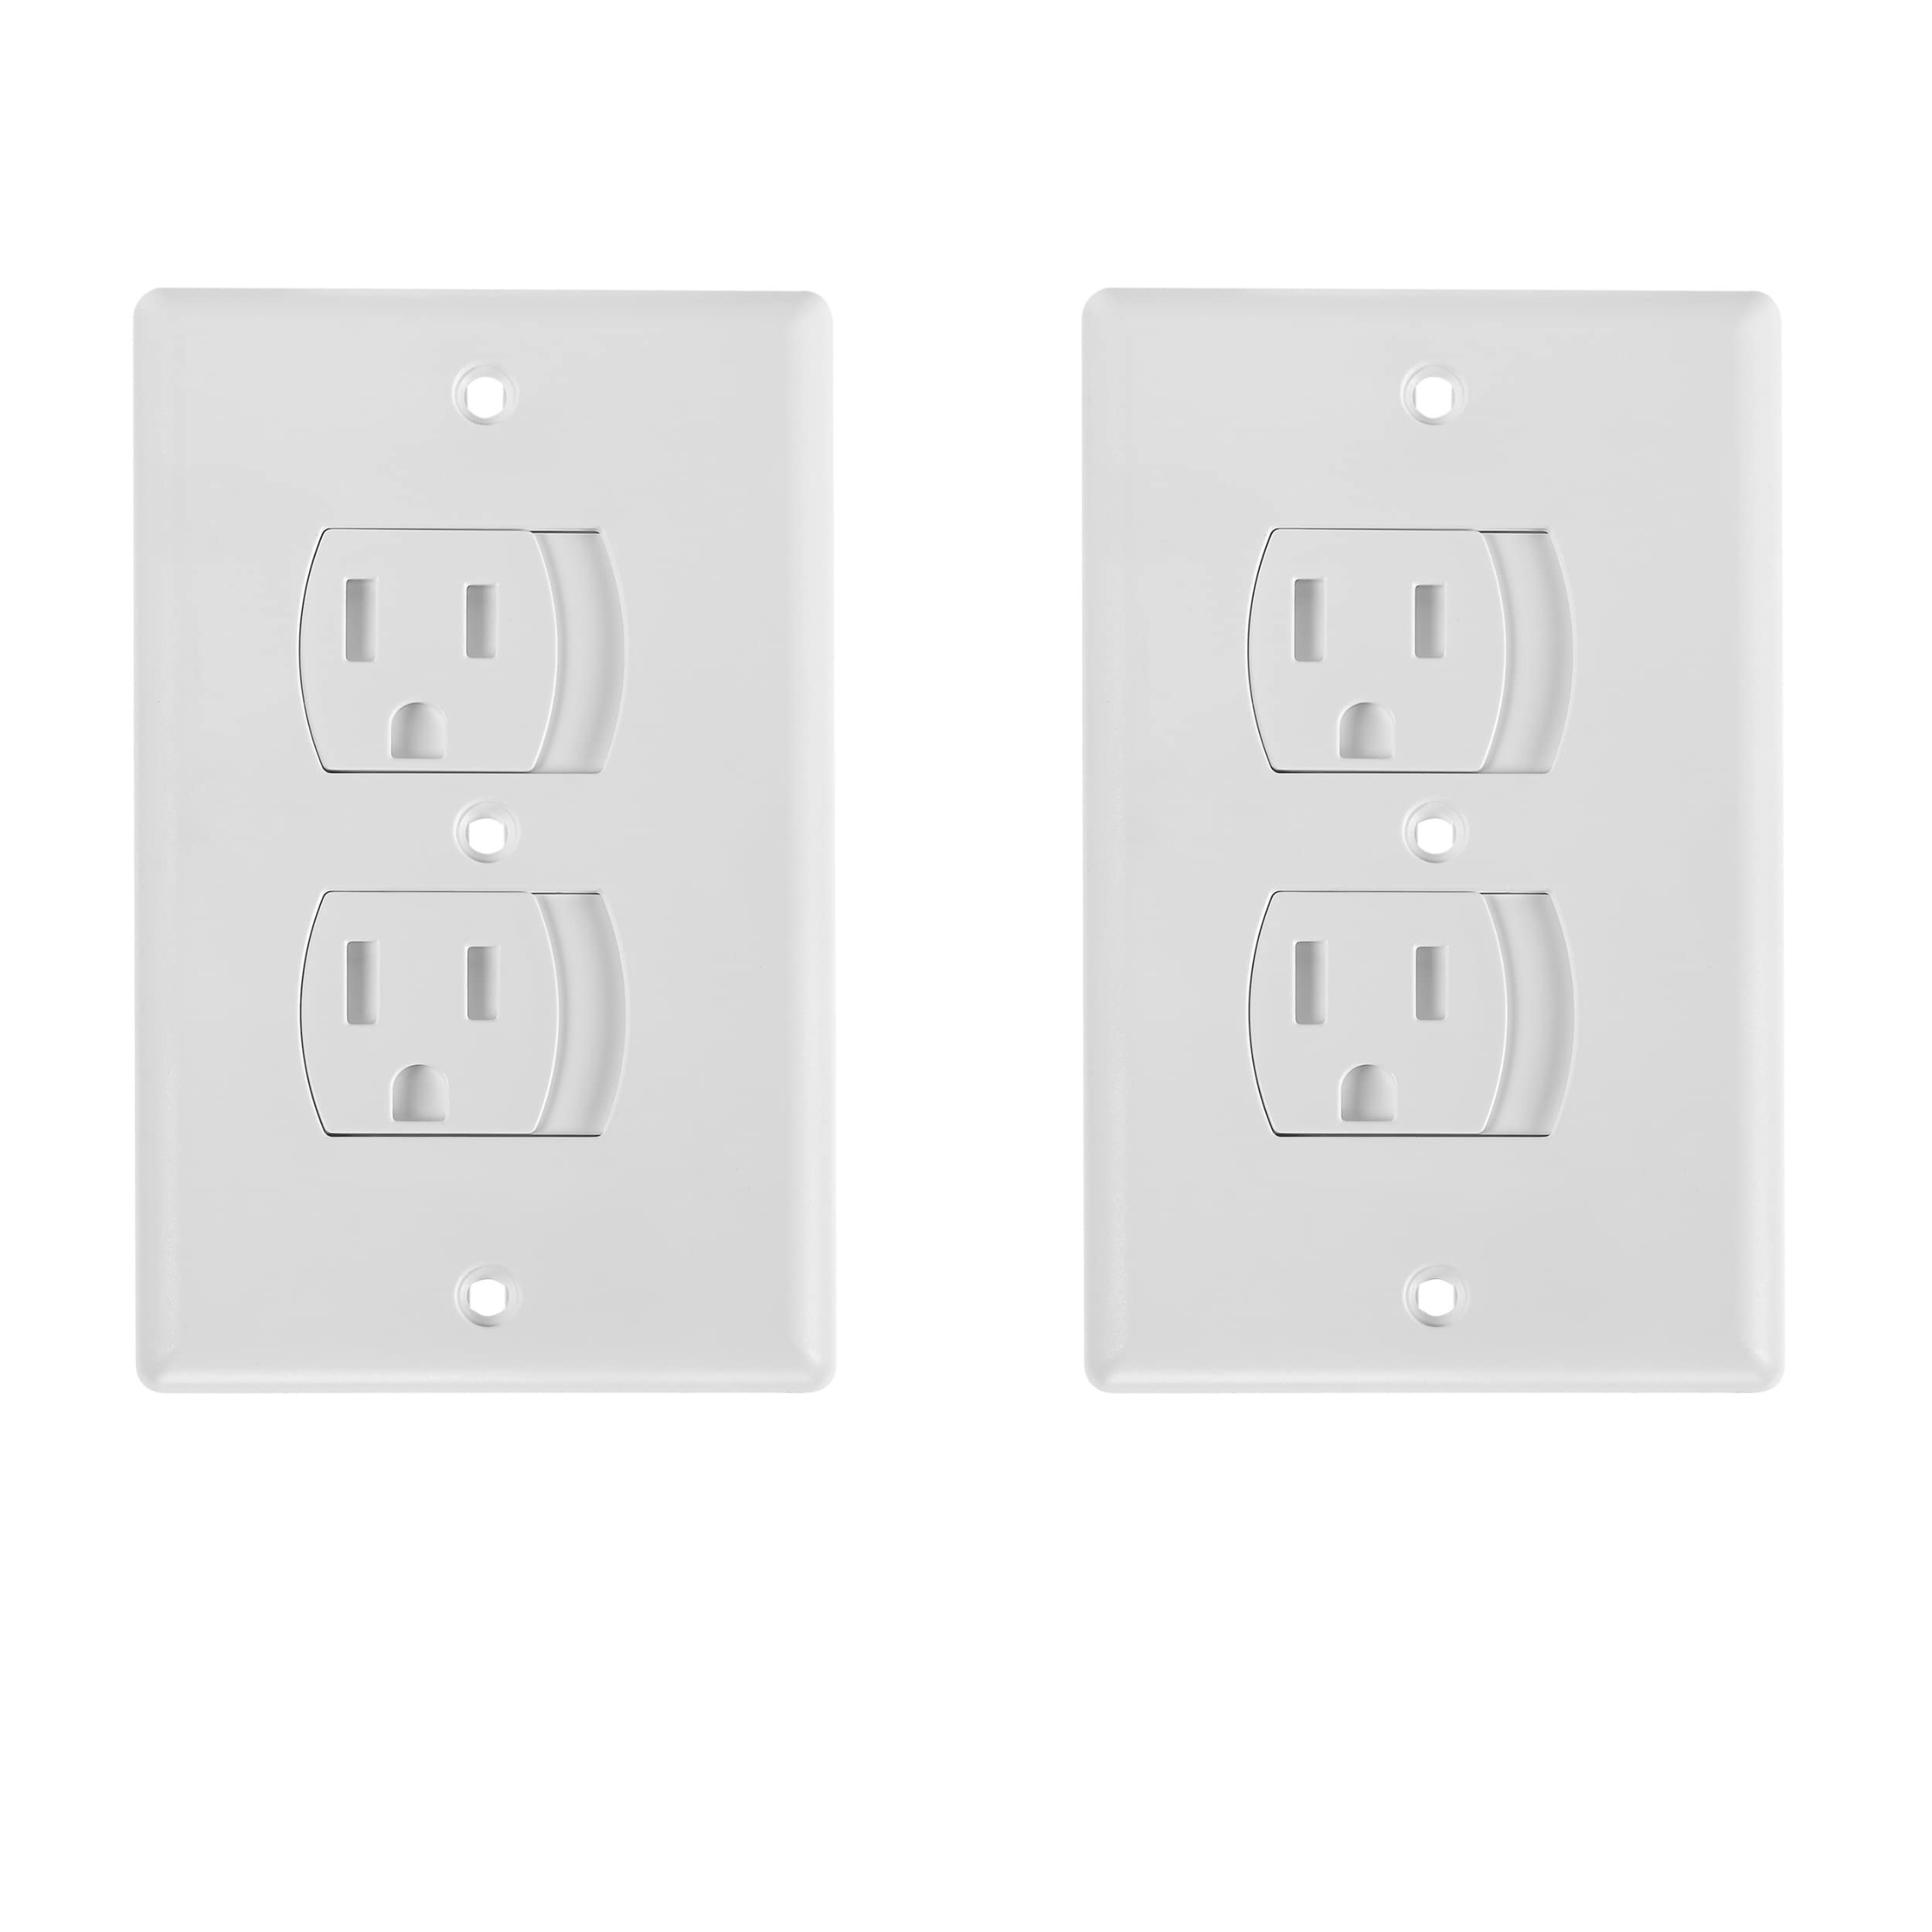 Bates- Self Closing Outlet Covers, 2 Pack, Sliding Outlet Covers